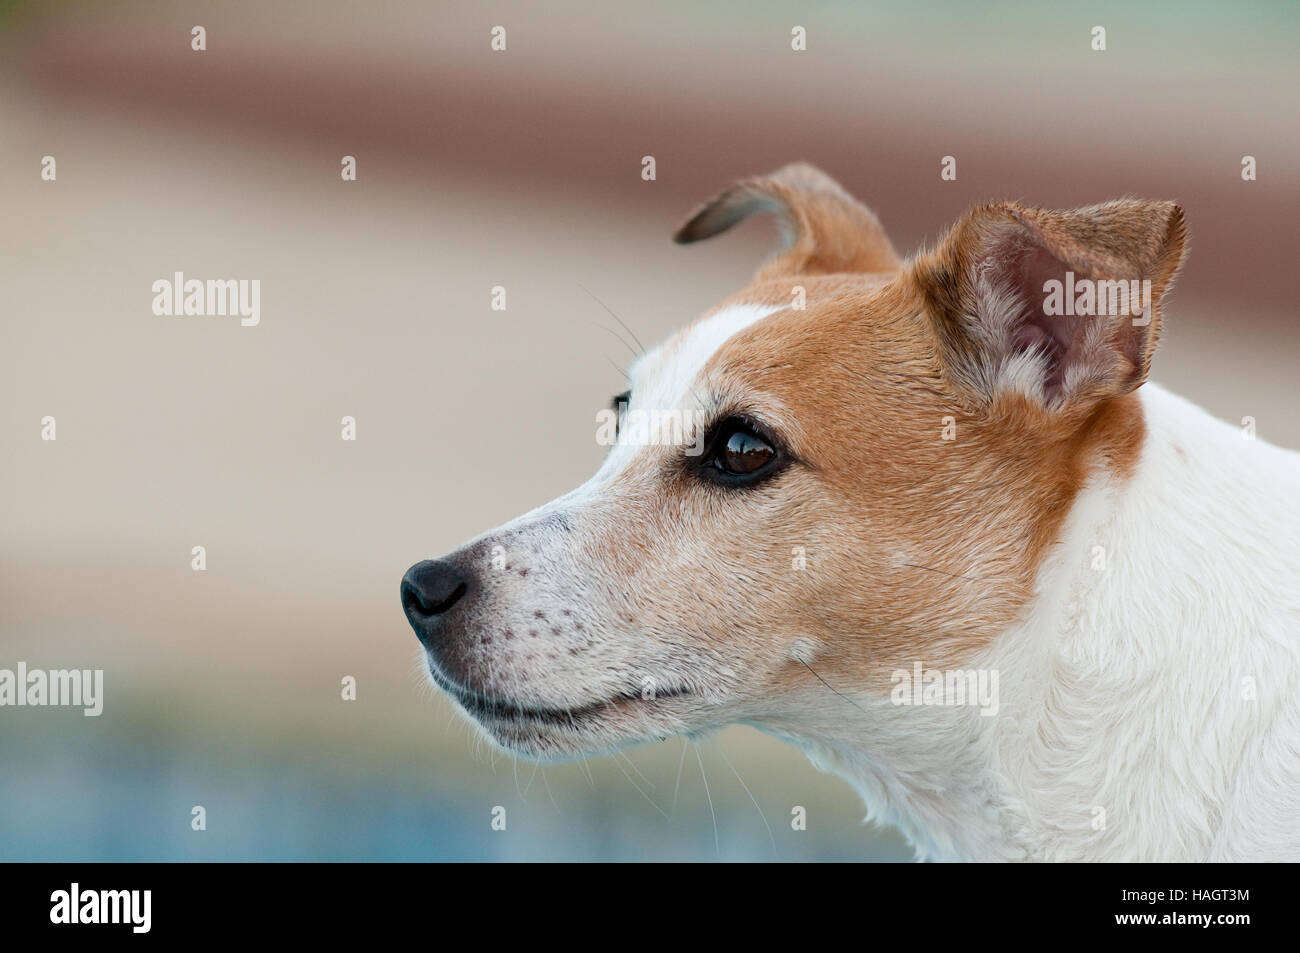 Carino jack russell terrier cane vicino. Foto Stock